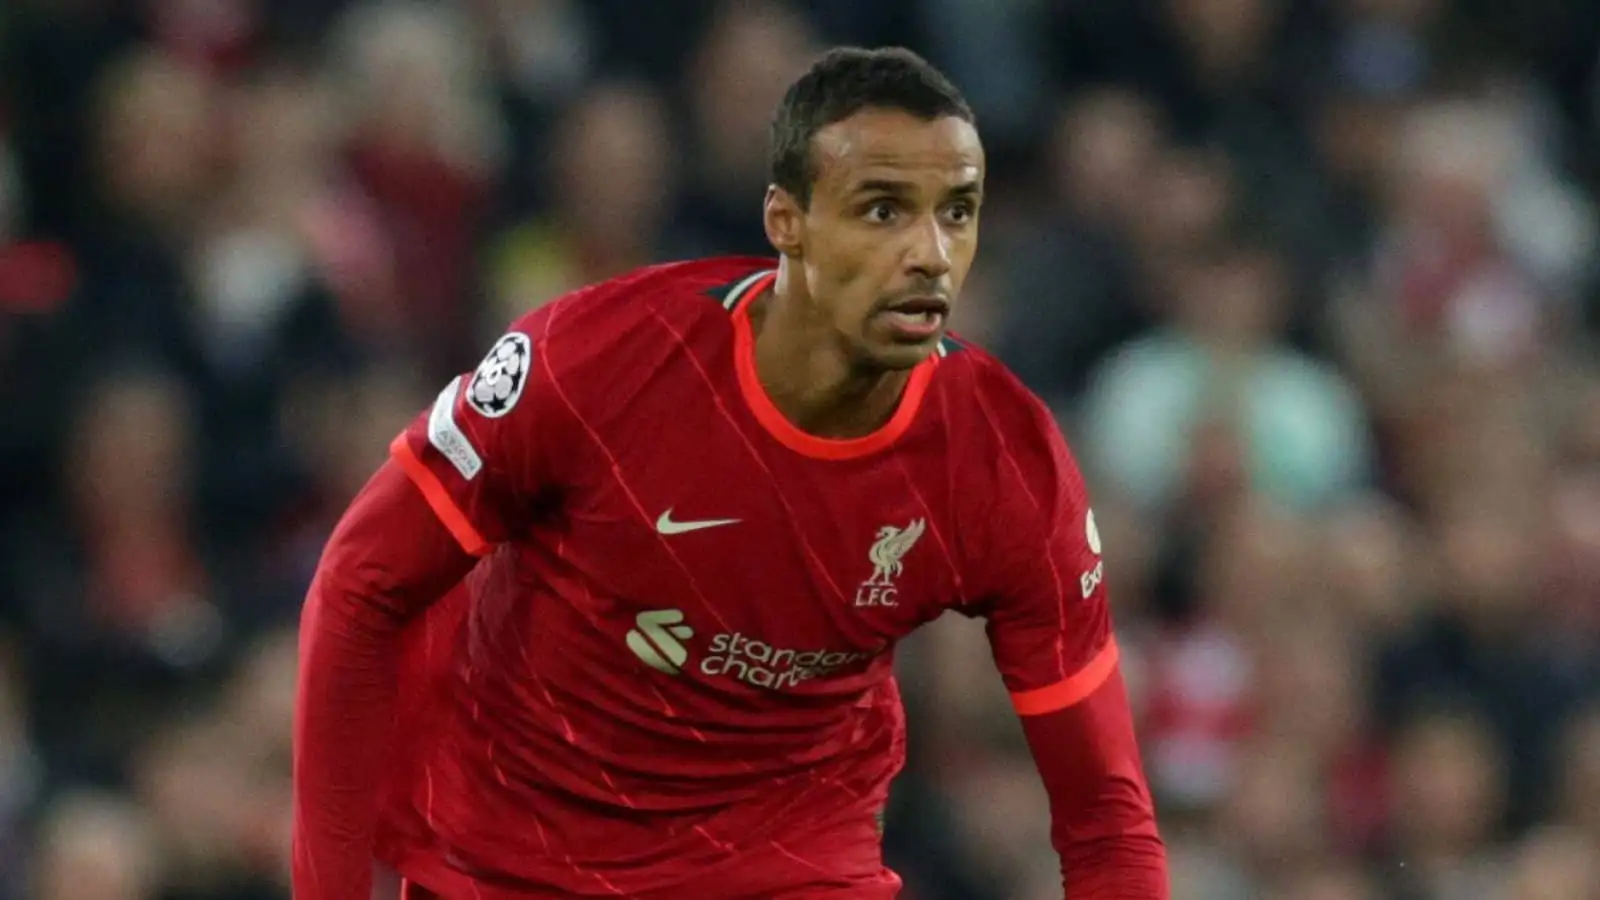 Joel Matip of Liverpool brings the ball out of defence, Liverpool versus FC Benfica, quarter-final 2nd leg